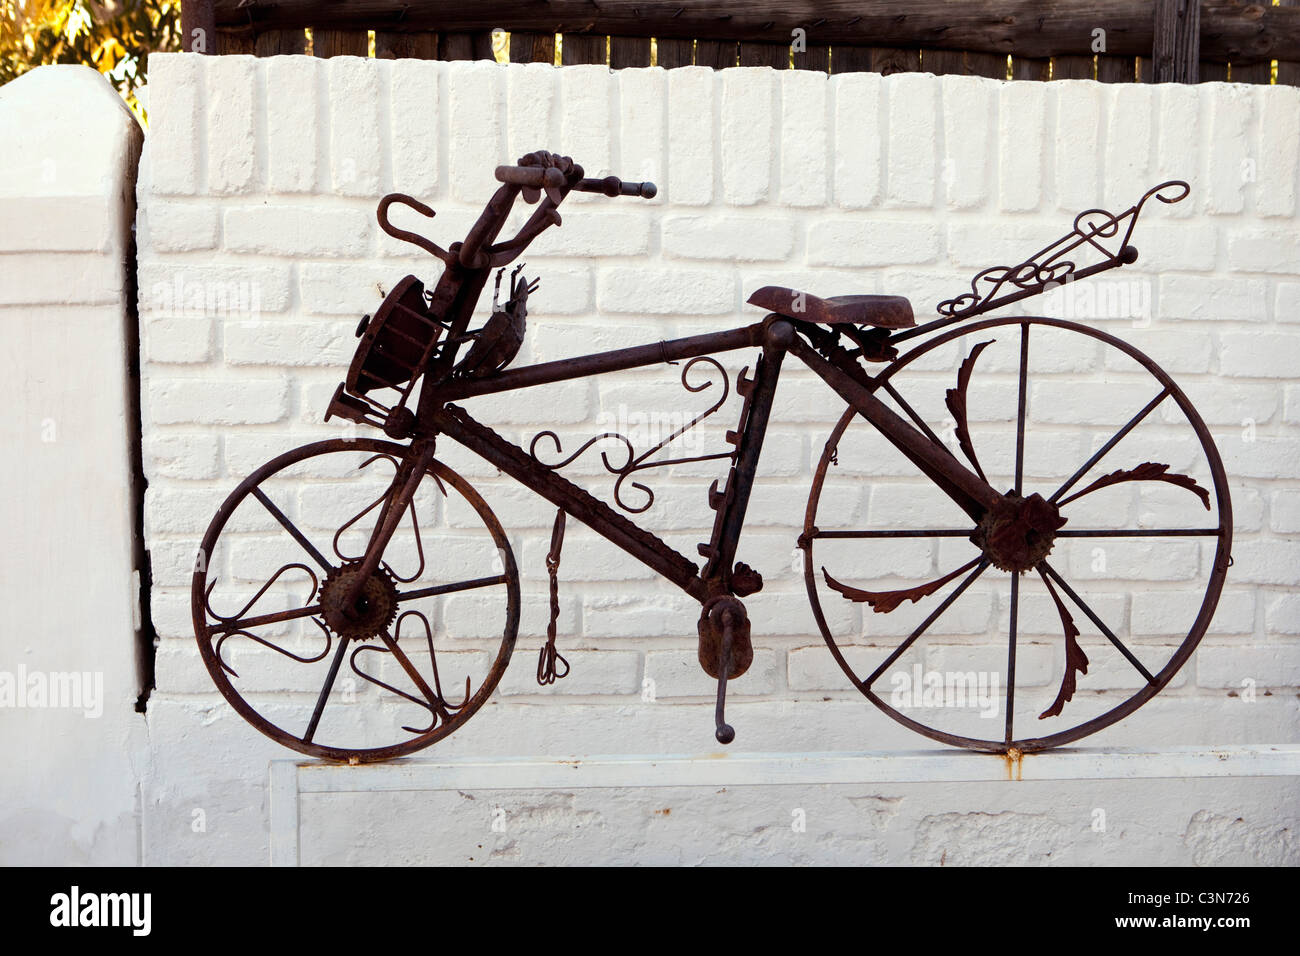 South Africa, Western Cape, Prince Albert, Artwork: bicycle from rusty iron from artist Kevin Hough. Stock Photo